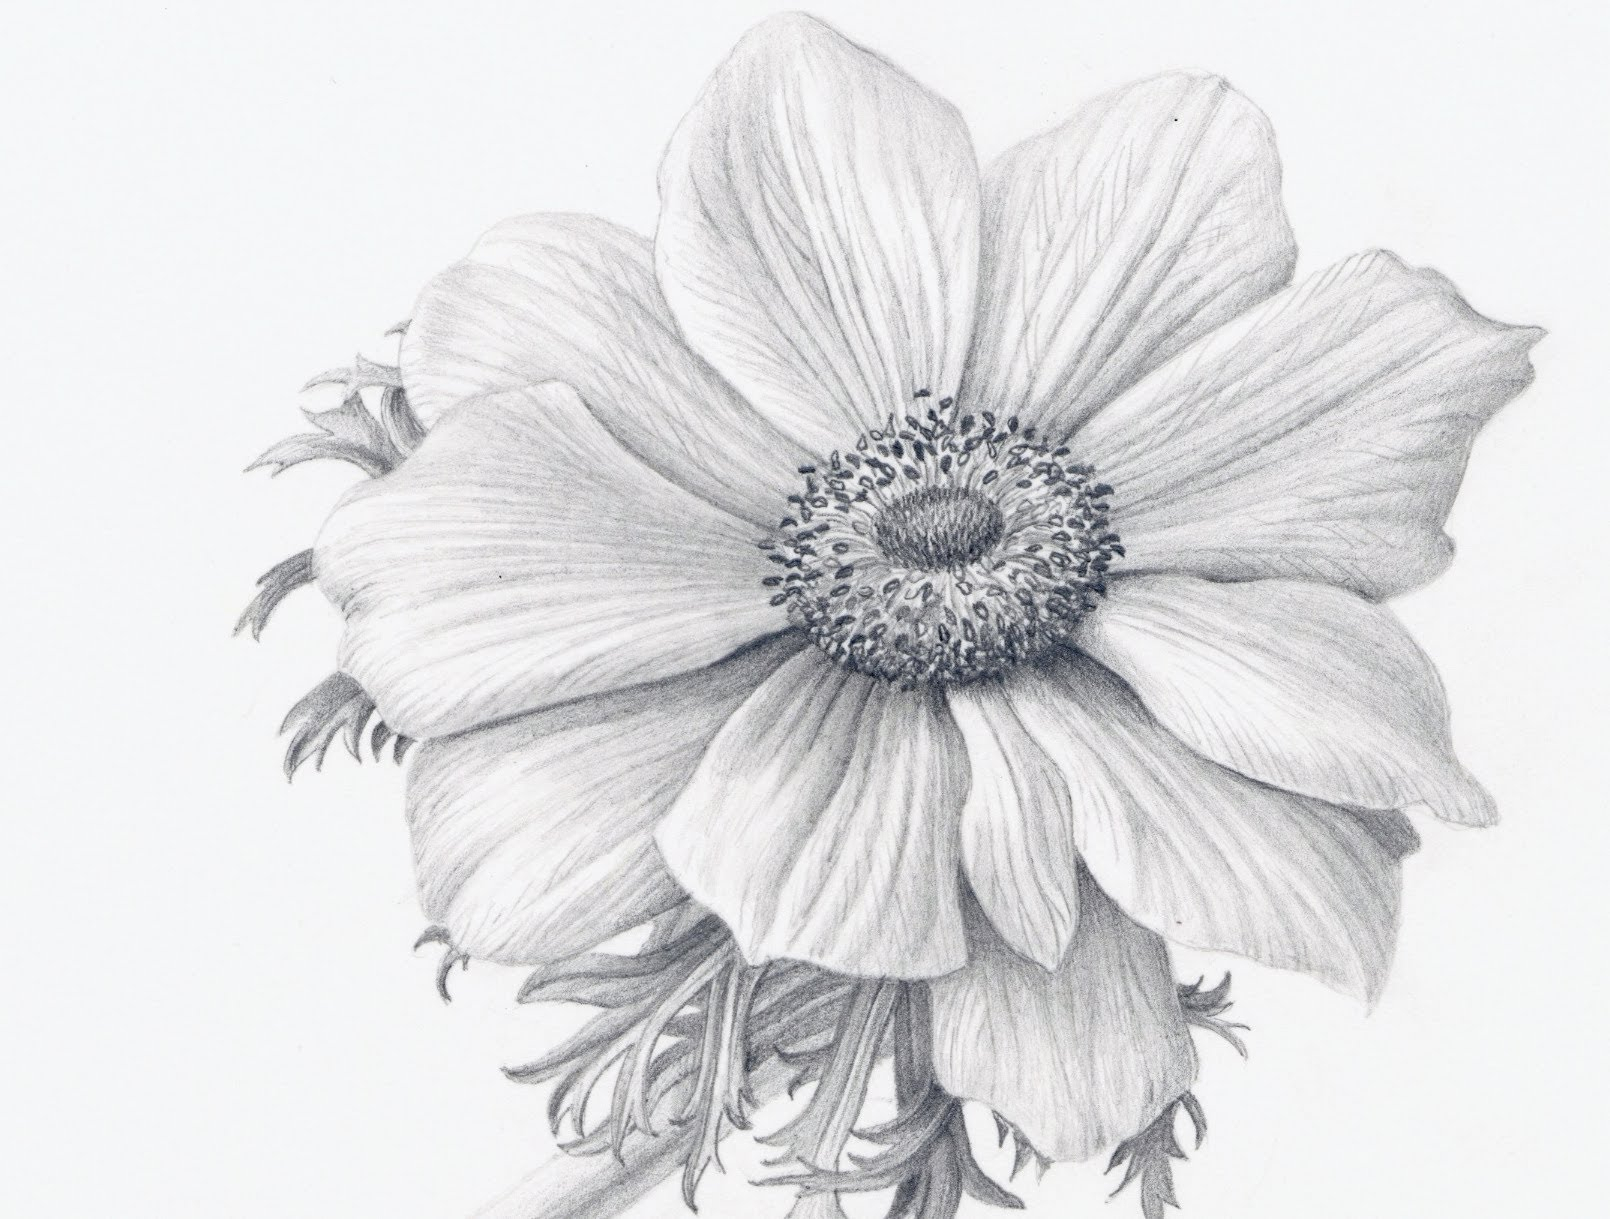 Realistic Pencil Drawings of Flowers